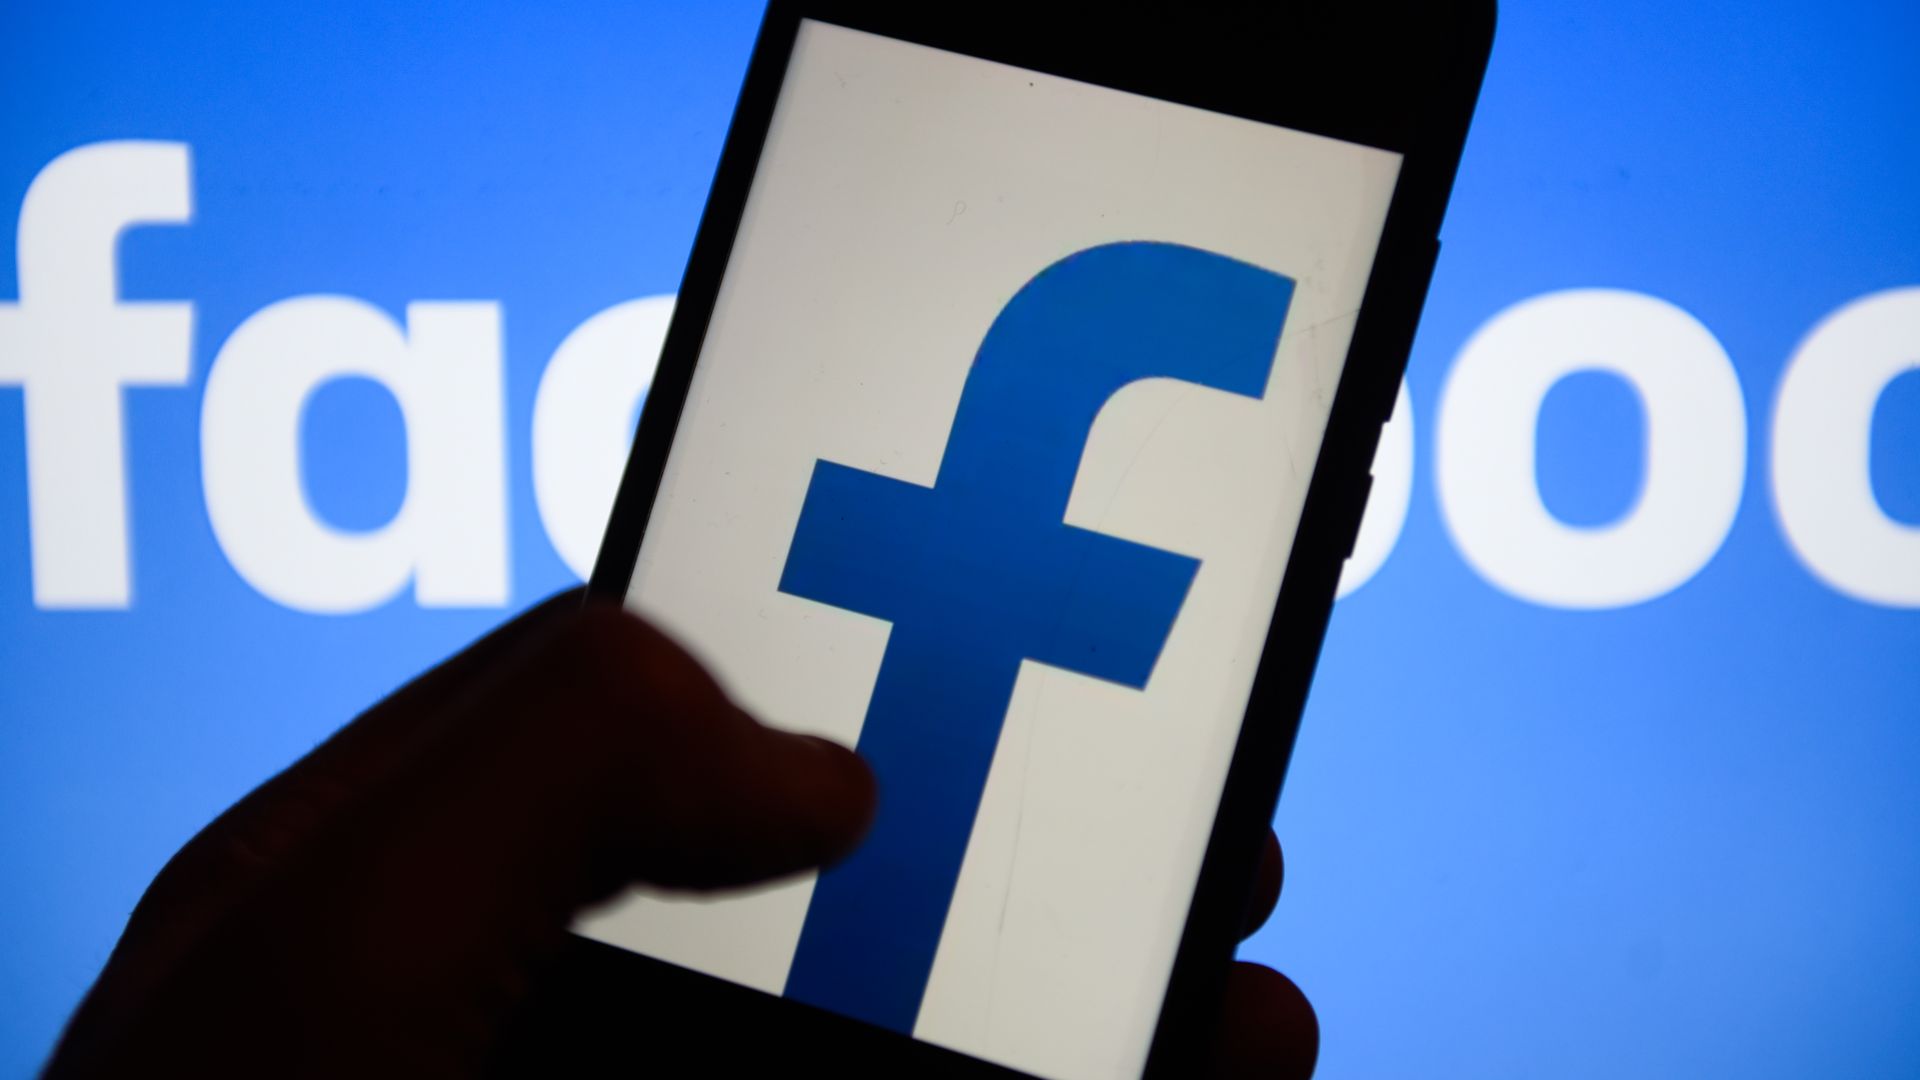 Facebook logo on smartphone screen with shadowy fingers